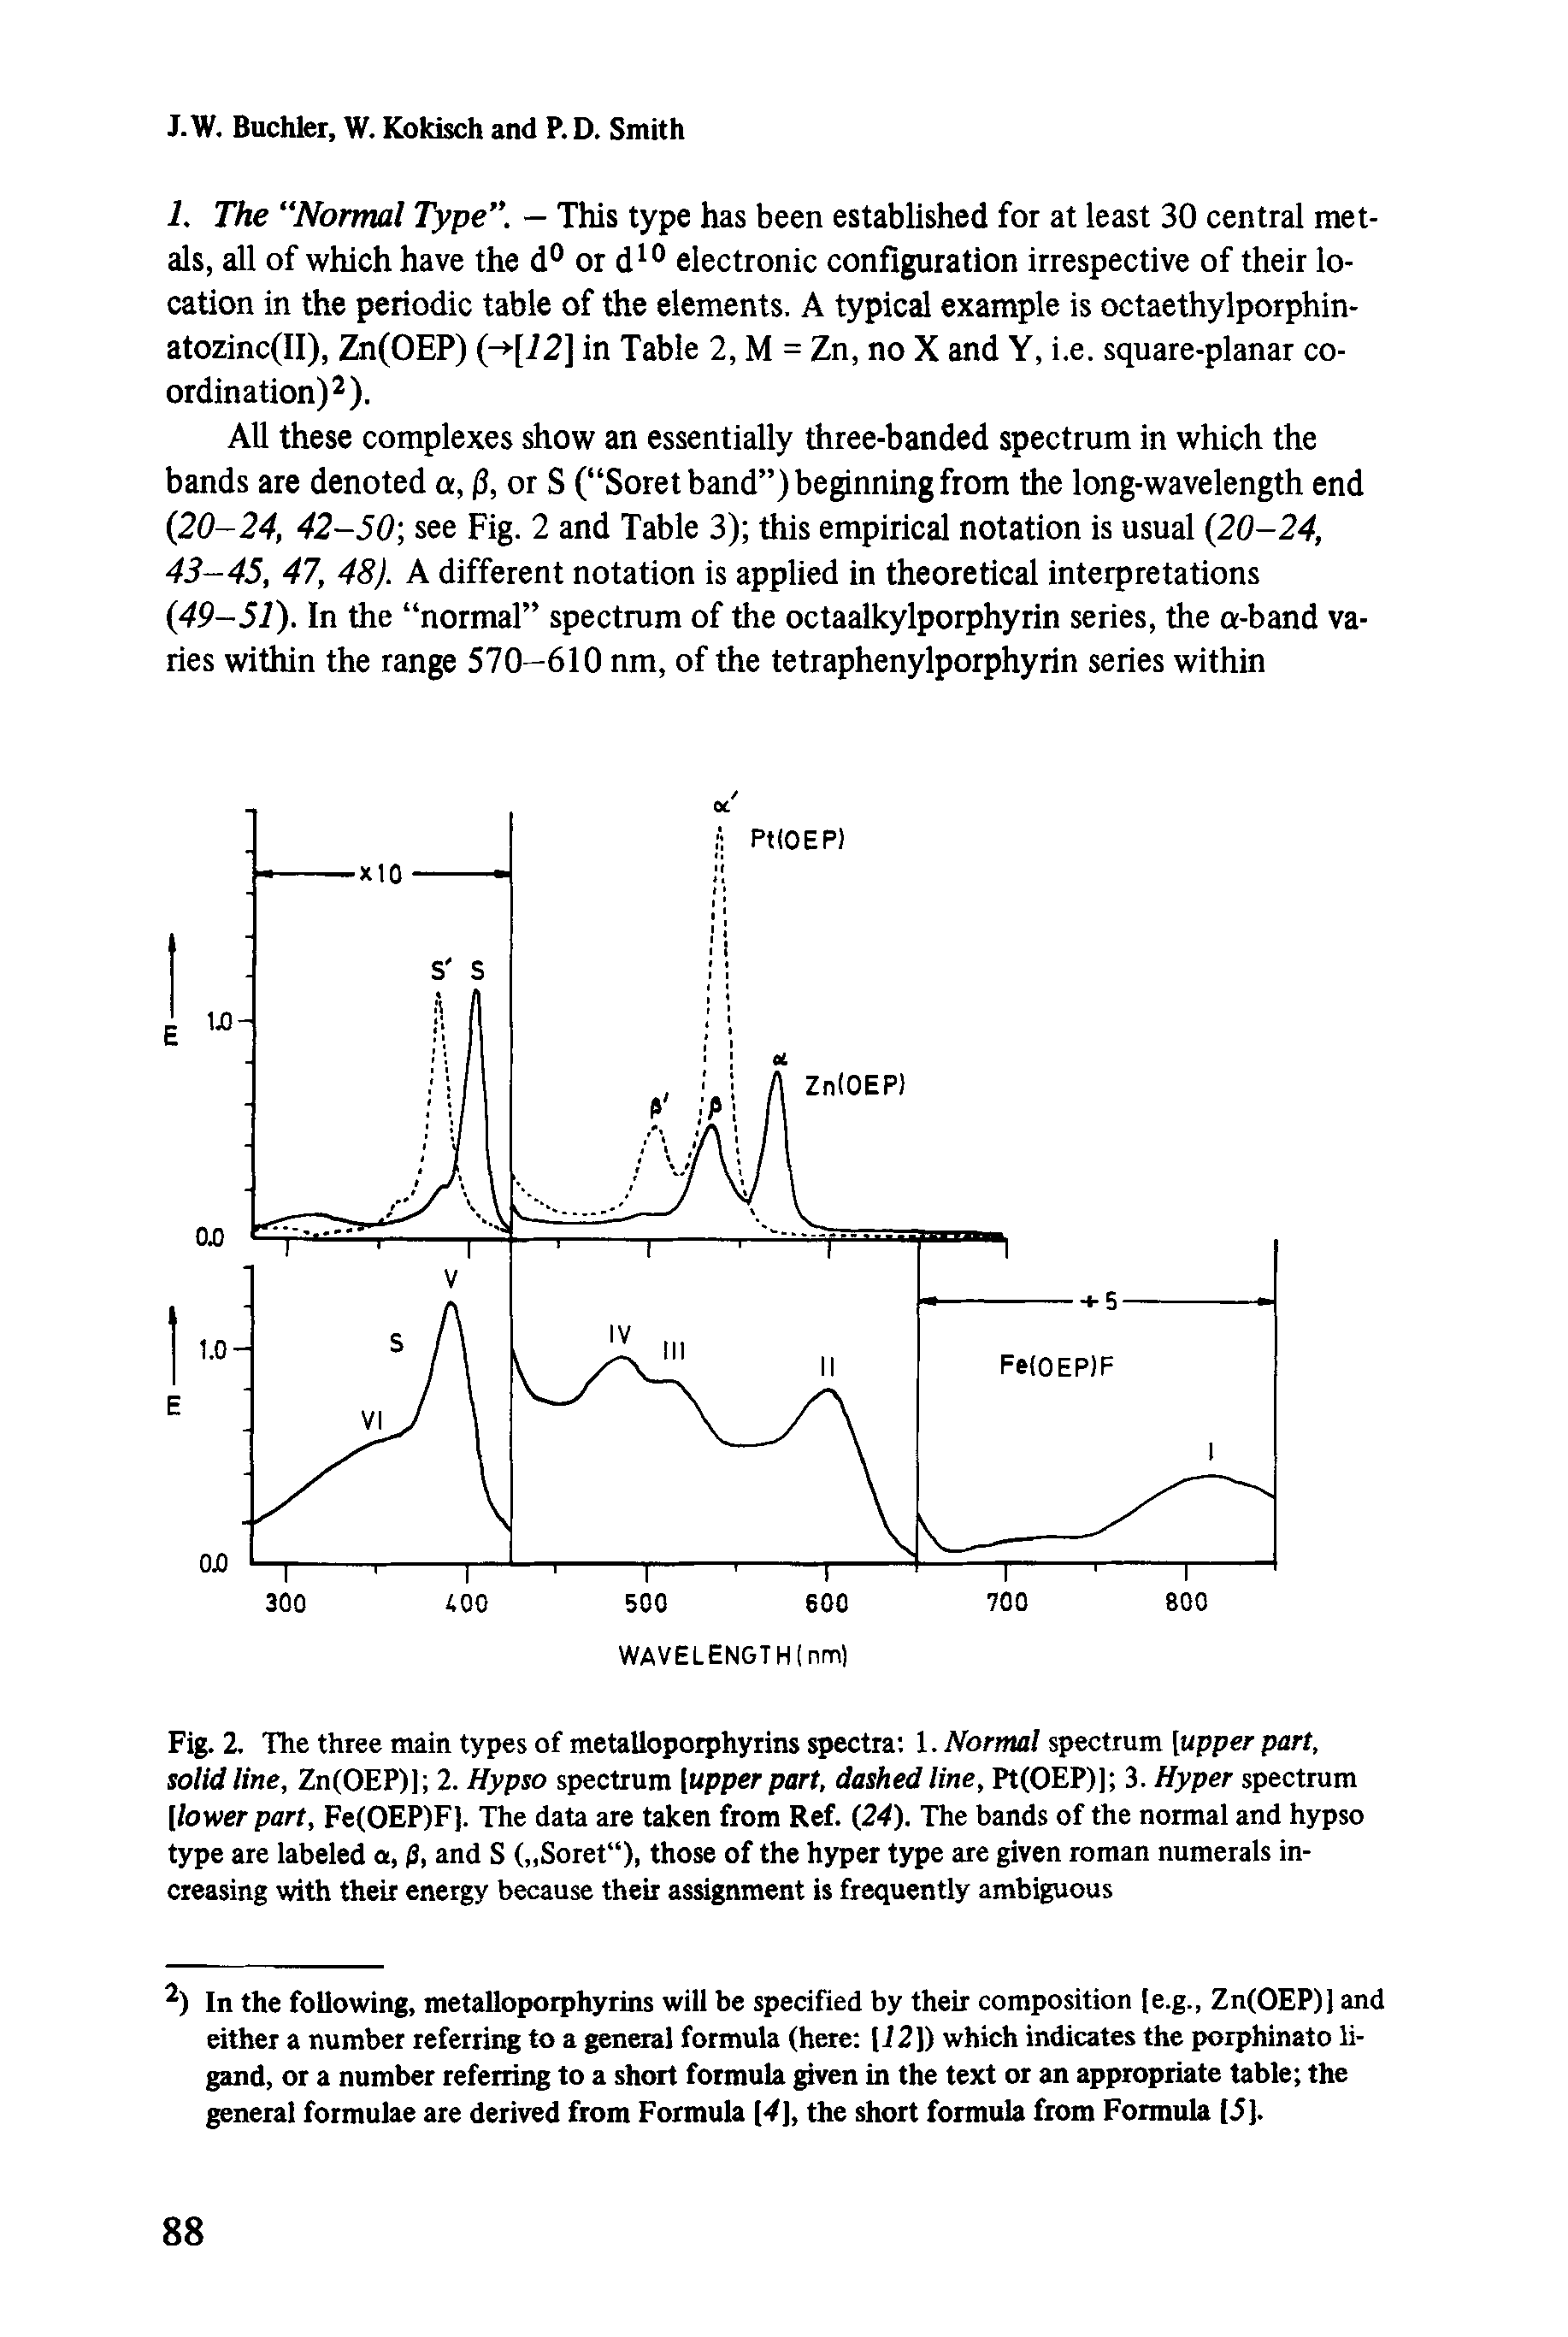 Fig. 2. The three main types of metalloporphyrins spectra 1. Normal spectrum [upper part, solid line, Zn(OEP)] 2. Hypso spectrum [upper part, dashed line, Pt(OEP)] 3. Hyper spectrum [lower part, Fe(OEP)F). The data are taken from Ref. [24). The bands of the normal and hypso type are labeled a, 0, and S ( Soret ), those of the hyper type are given roman numerals increasing with their energy because their assignment is frequently ambiguous...